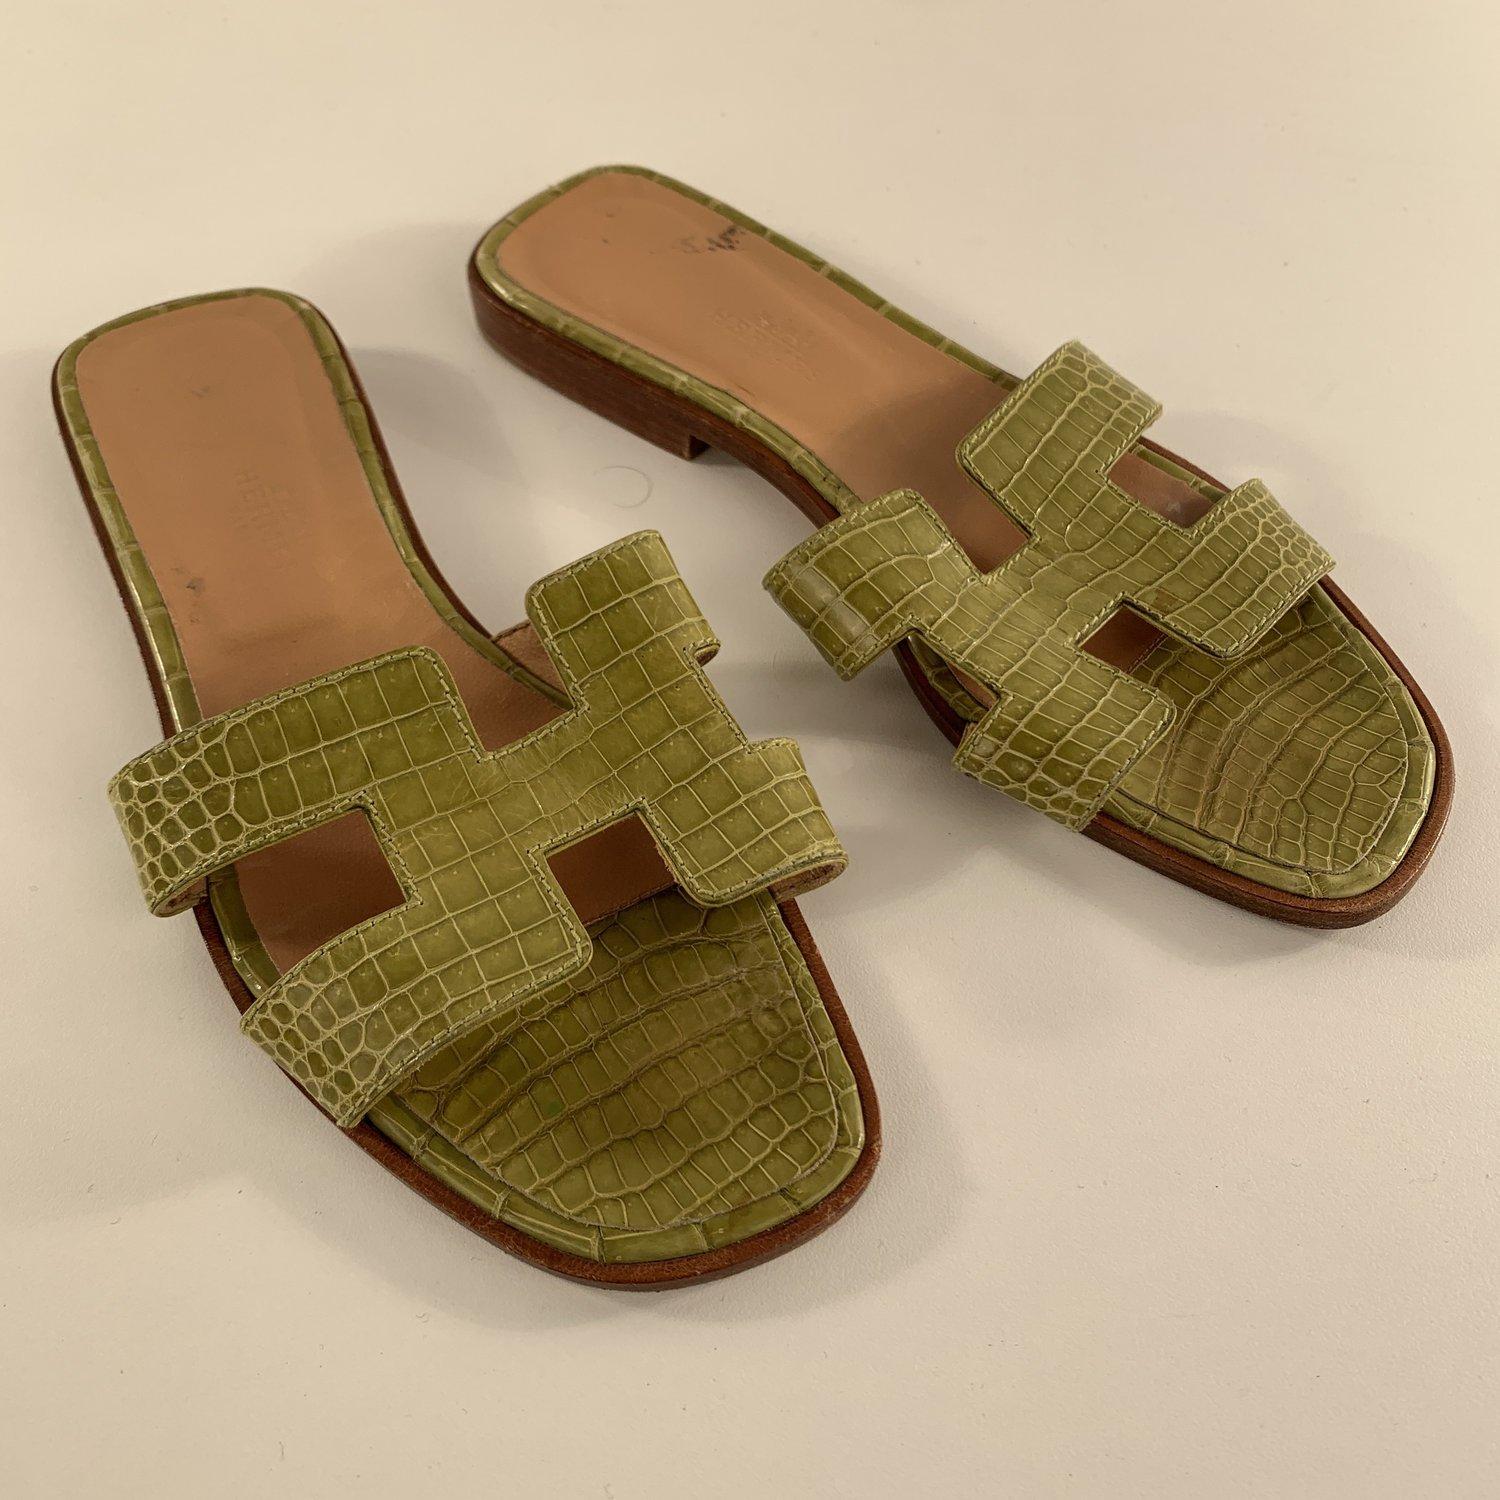 Hermès Oran Sandals crafted in green crocodile leather. Signature iconic cut-out 'H'-shaped strap. Natural leather heels and soles. Size 36. Hermes dustbag included


Details

MATERIAL: Leather

COLOR: Green

MODEL: Oran Sandals

GENDER: